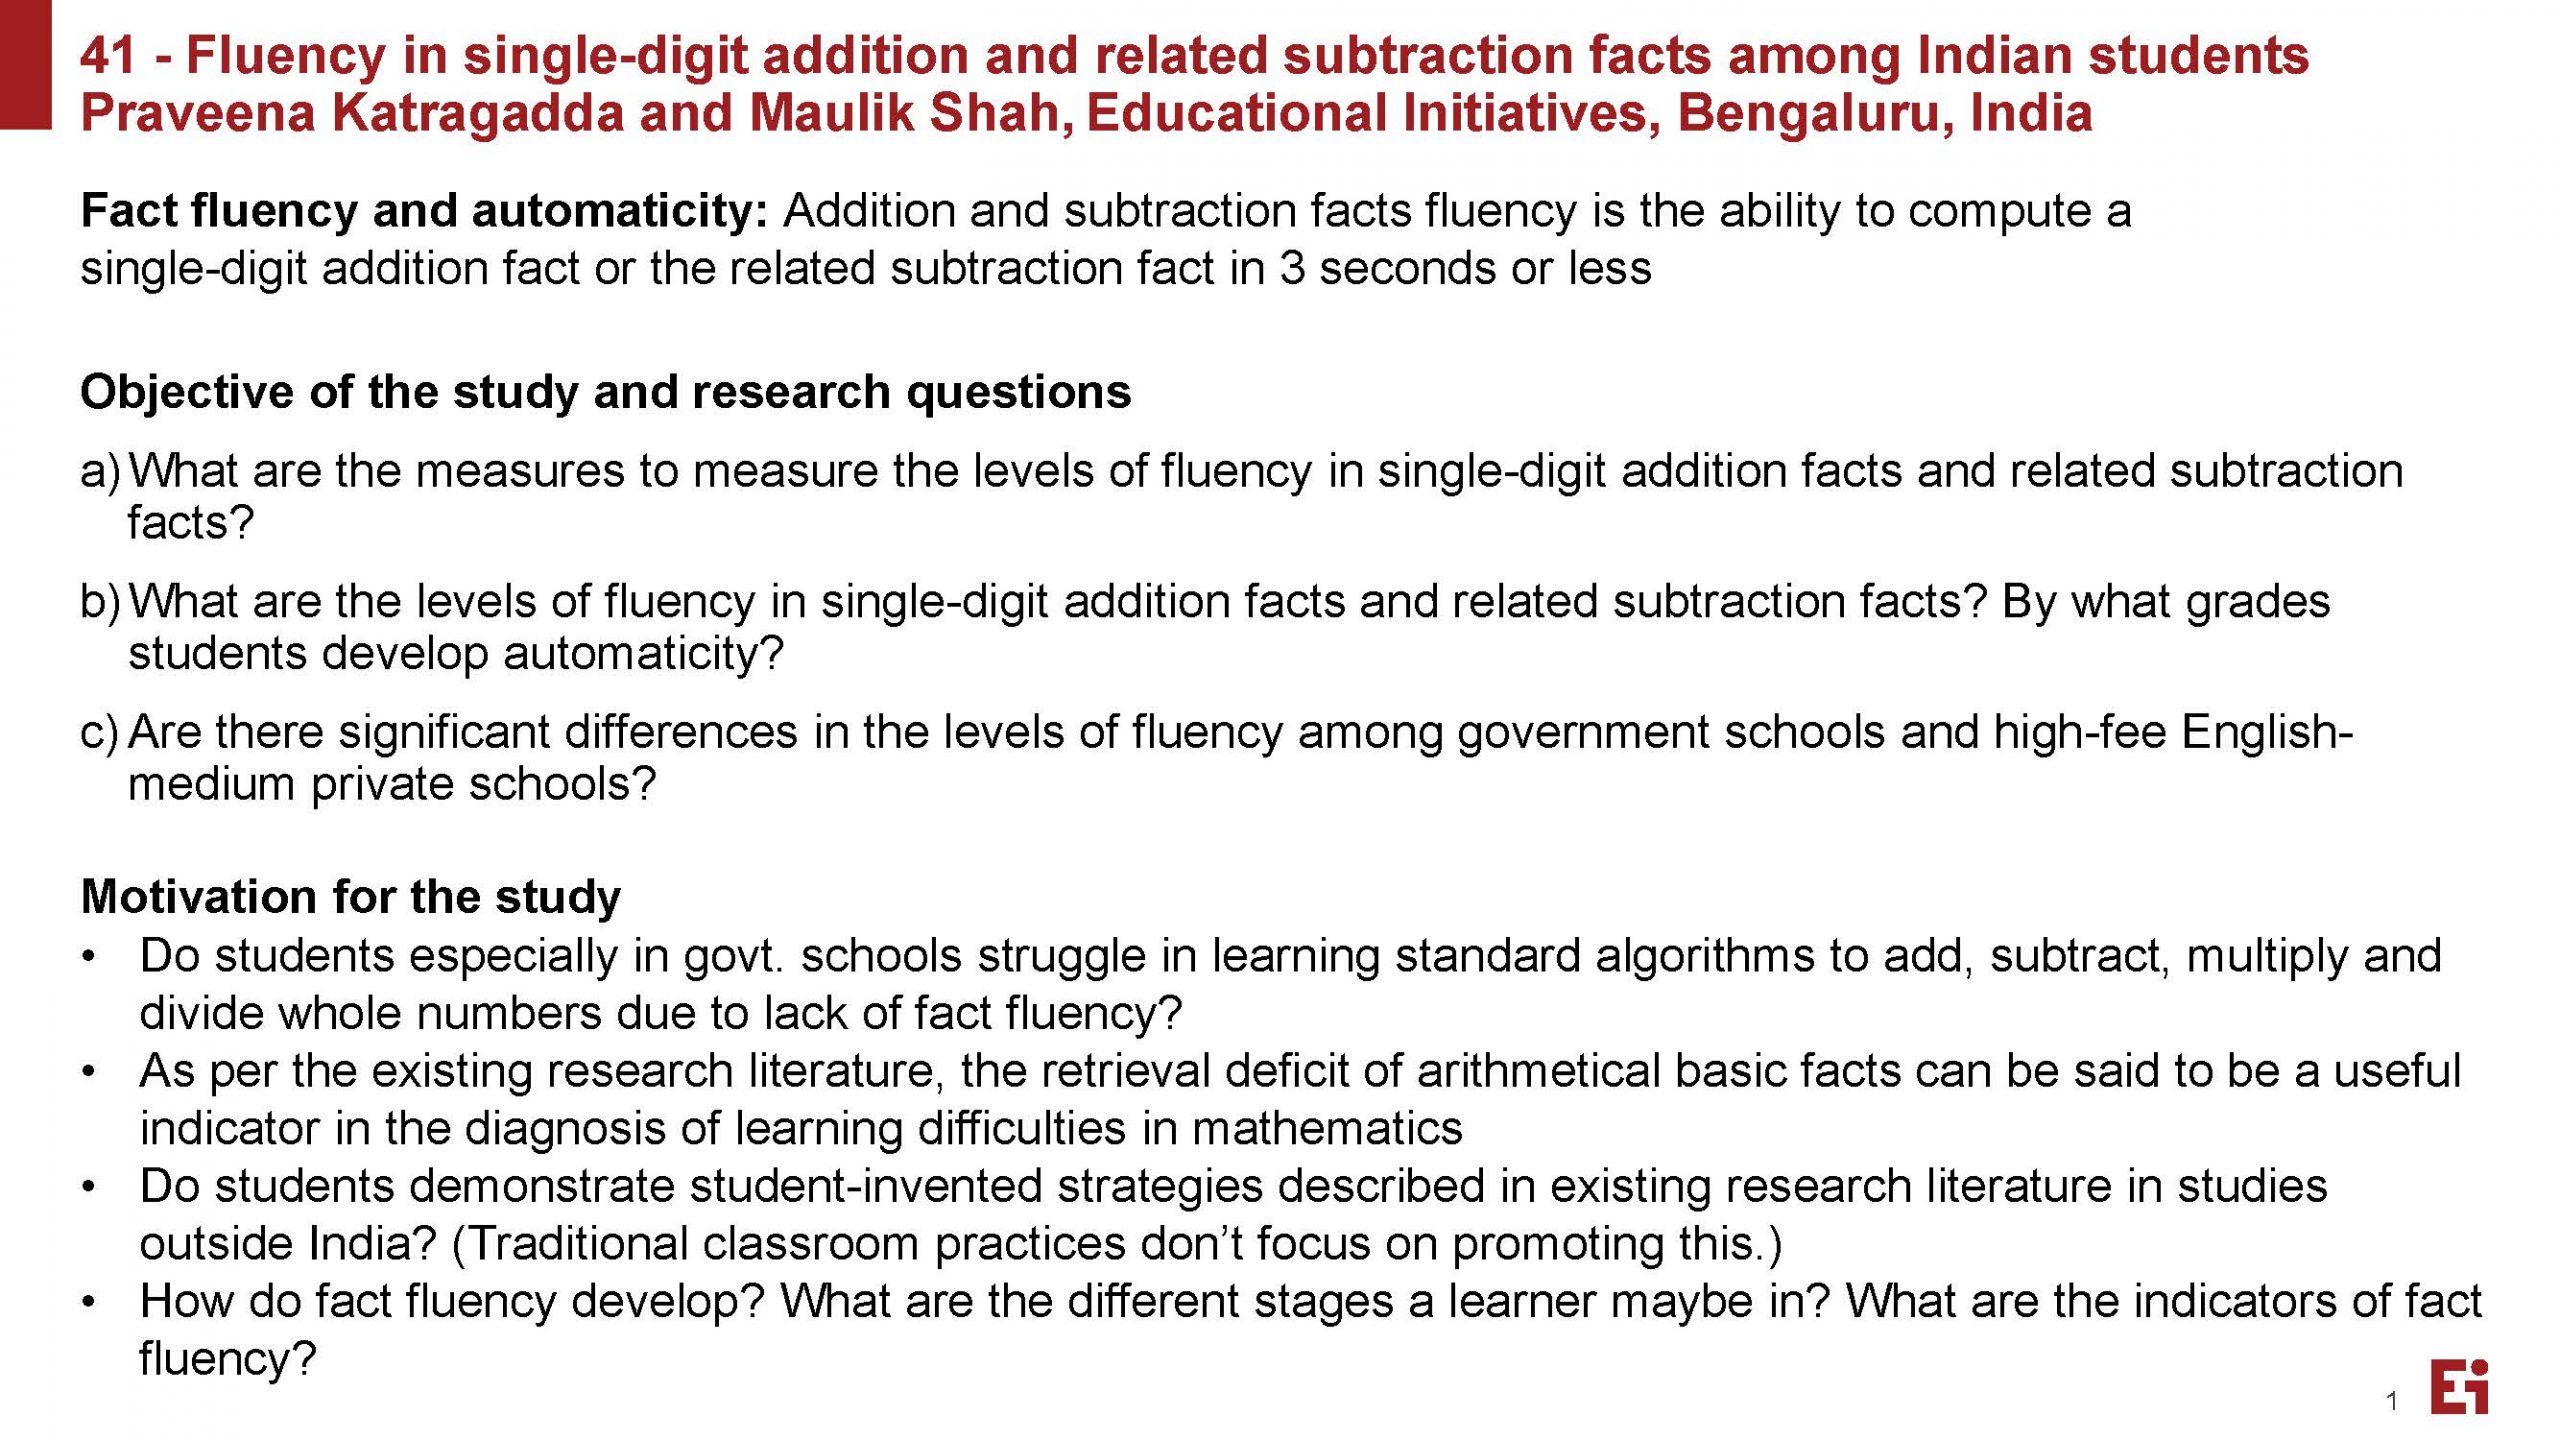 Fluency in single digit addition and related subtraction facts among Indian students